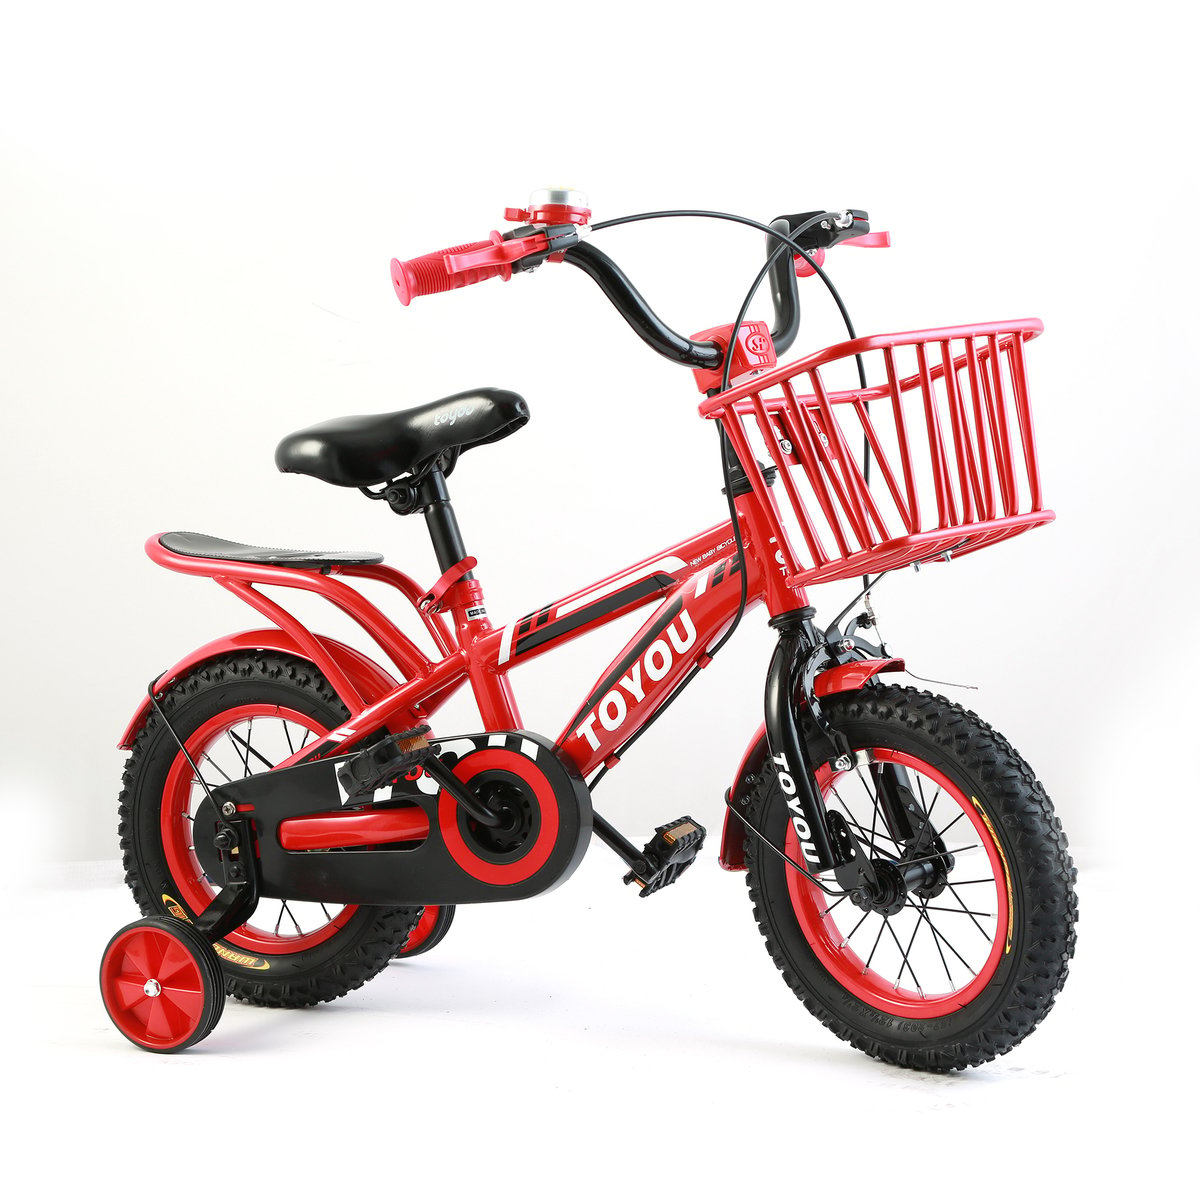 Skid Fusion Kids Bicycle 12inch MF-12